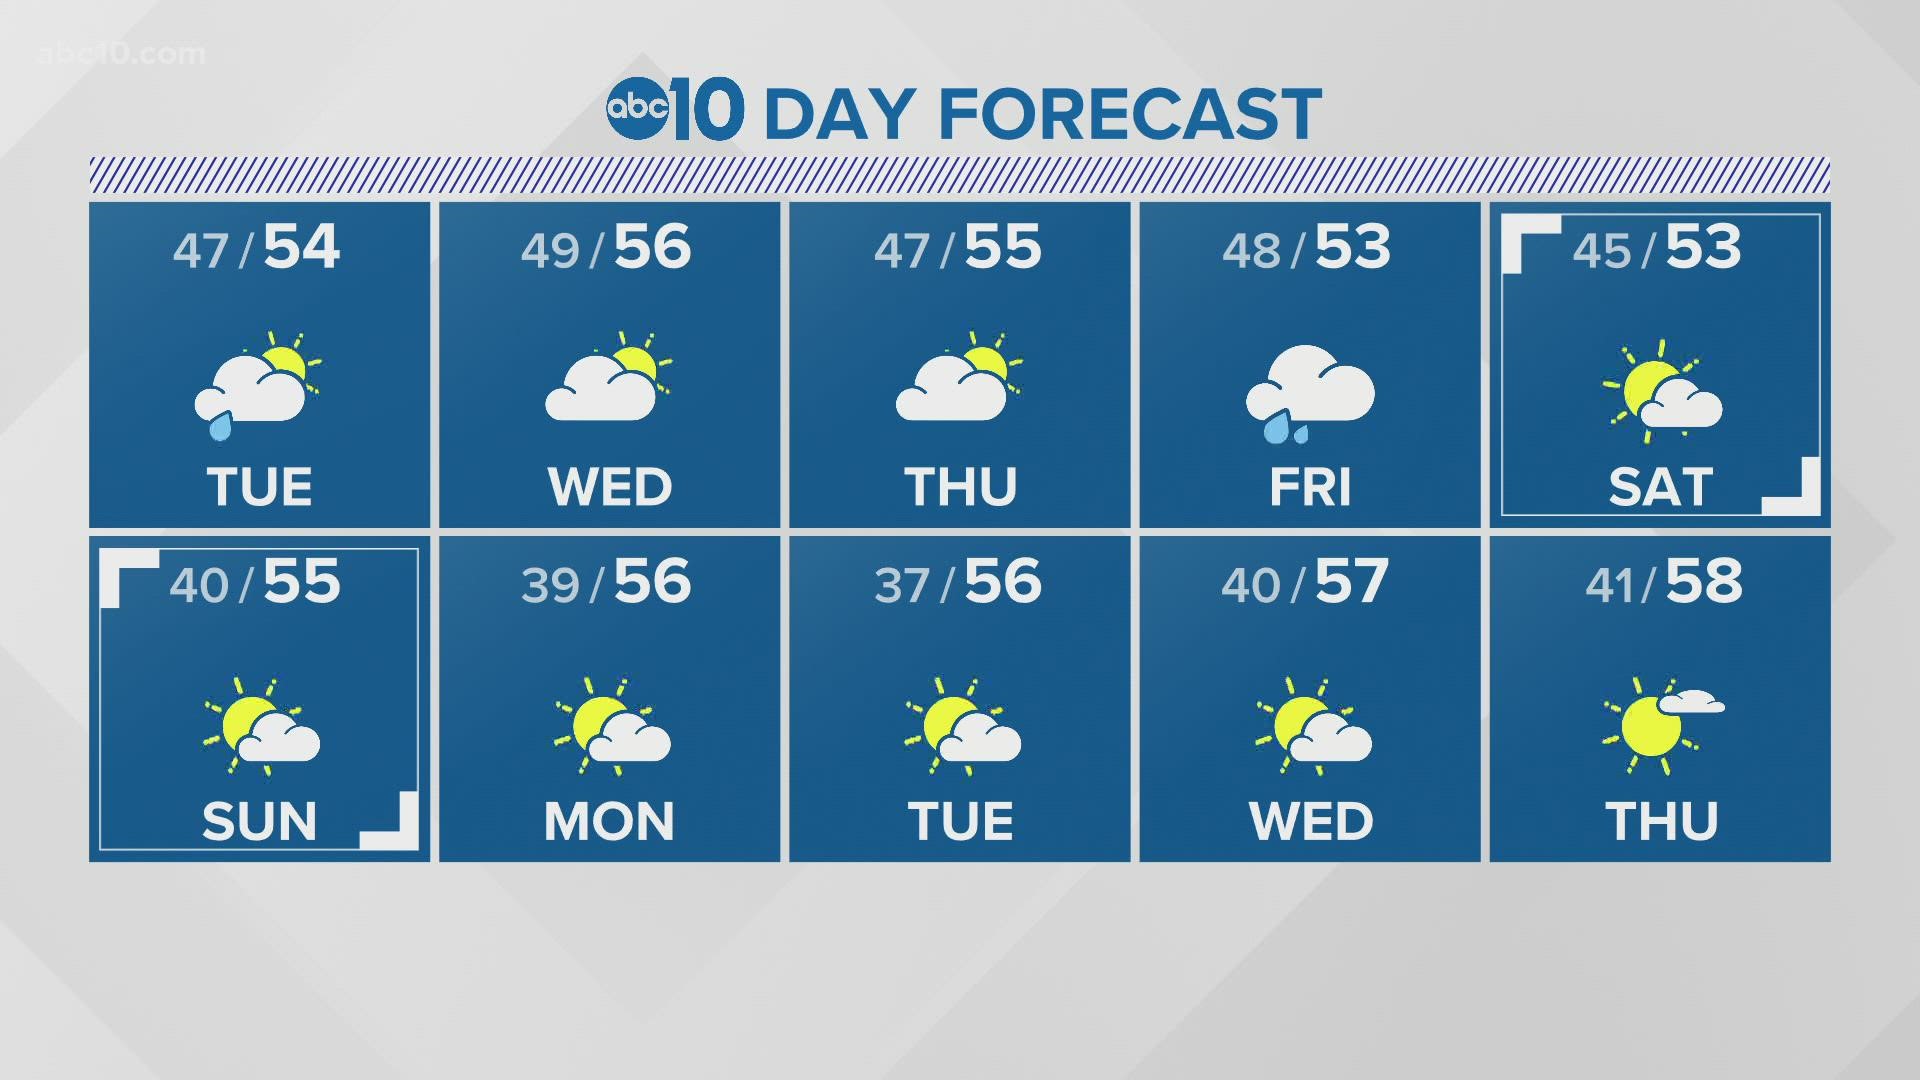 Monica Wood shows us what the next 10 days of weather will look like.